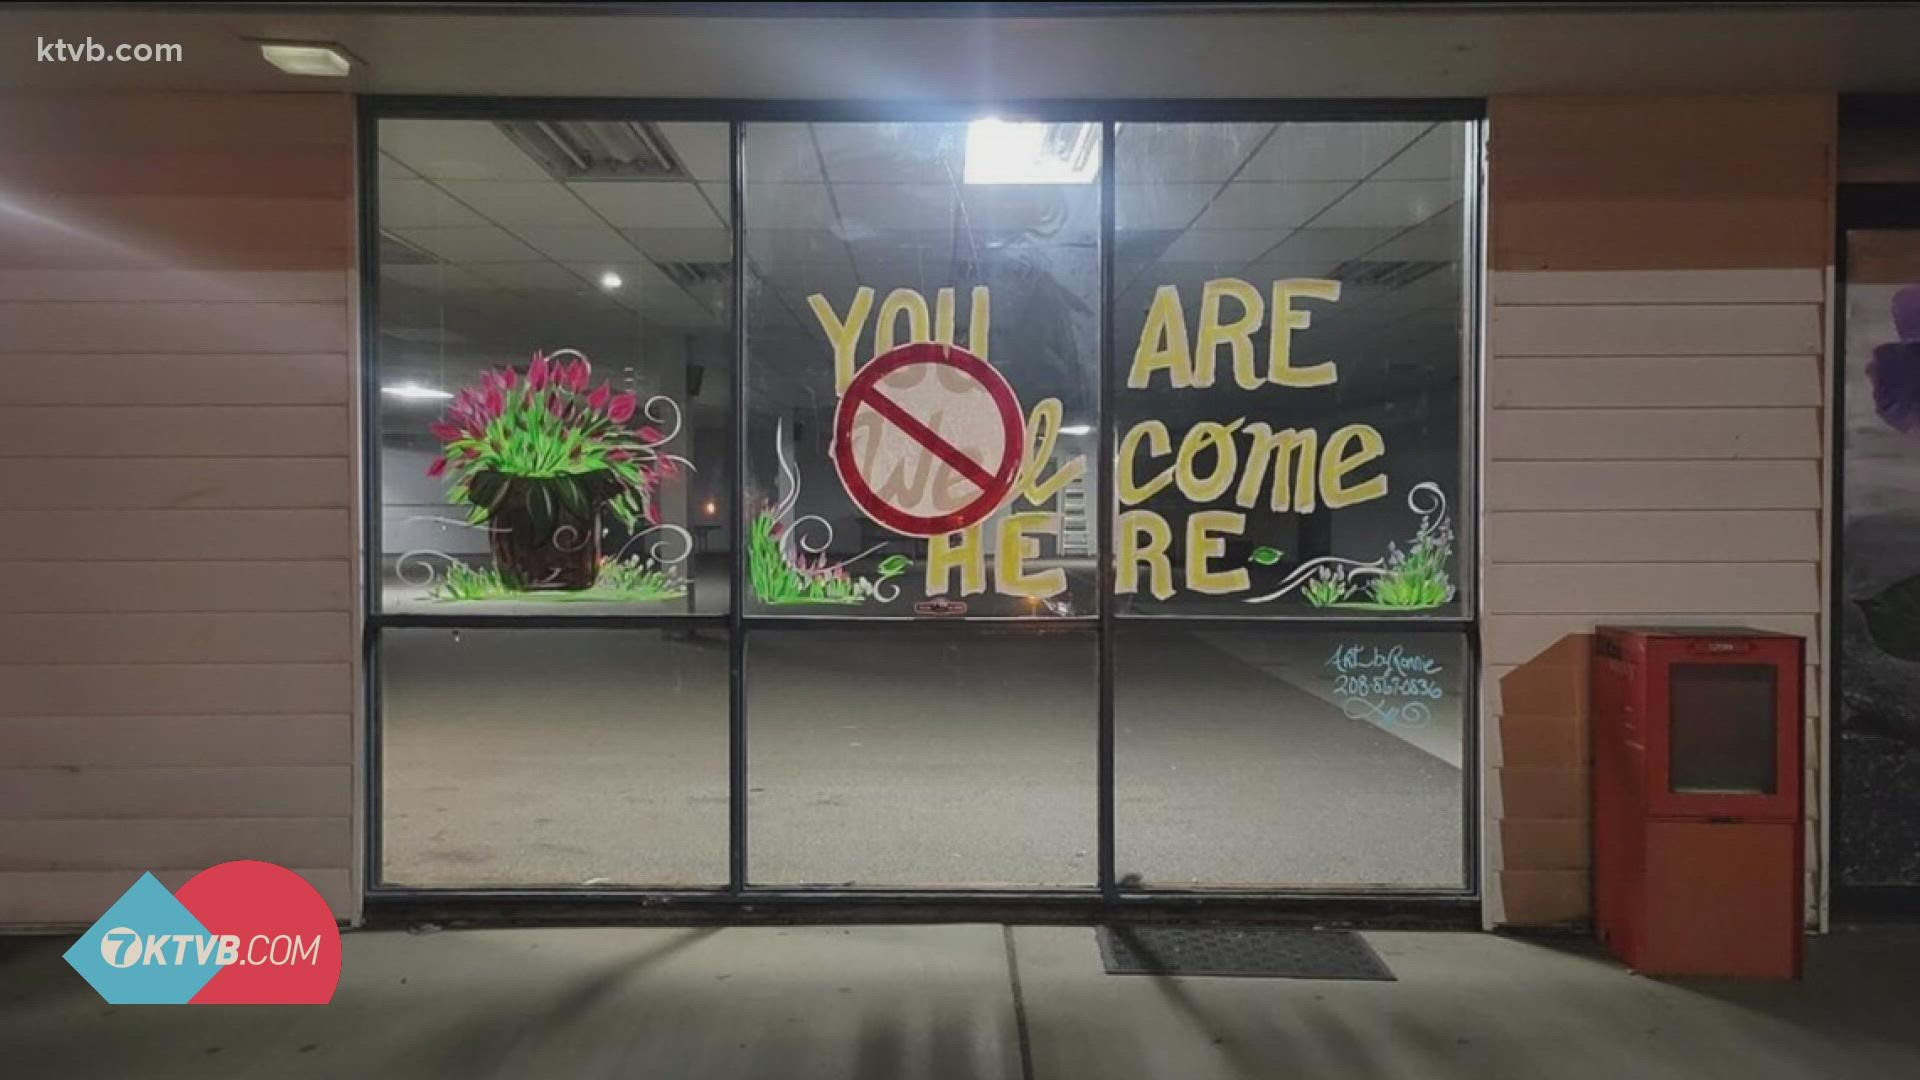 The message "You Are Welcome Here" was defaced with a large symbol effectively crossing out the word "welcome."